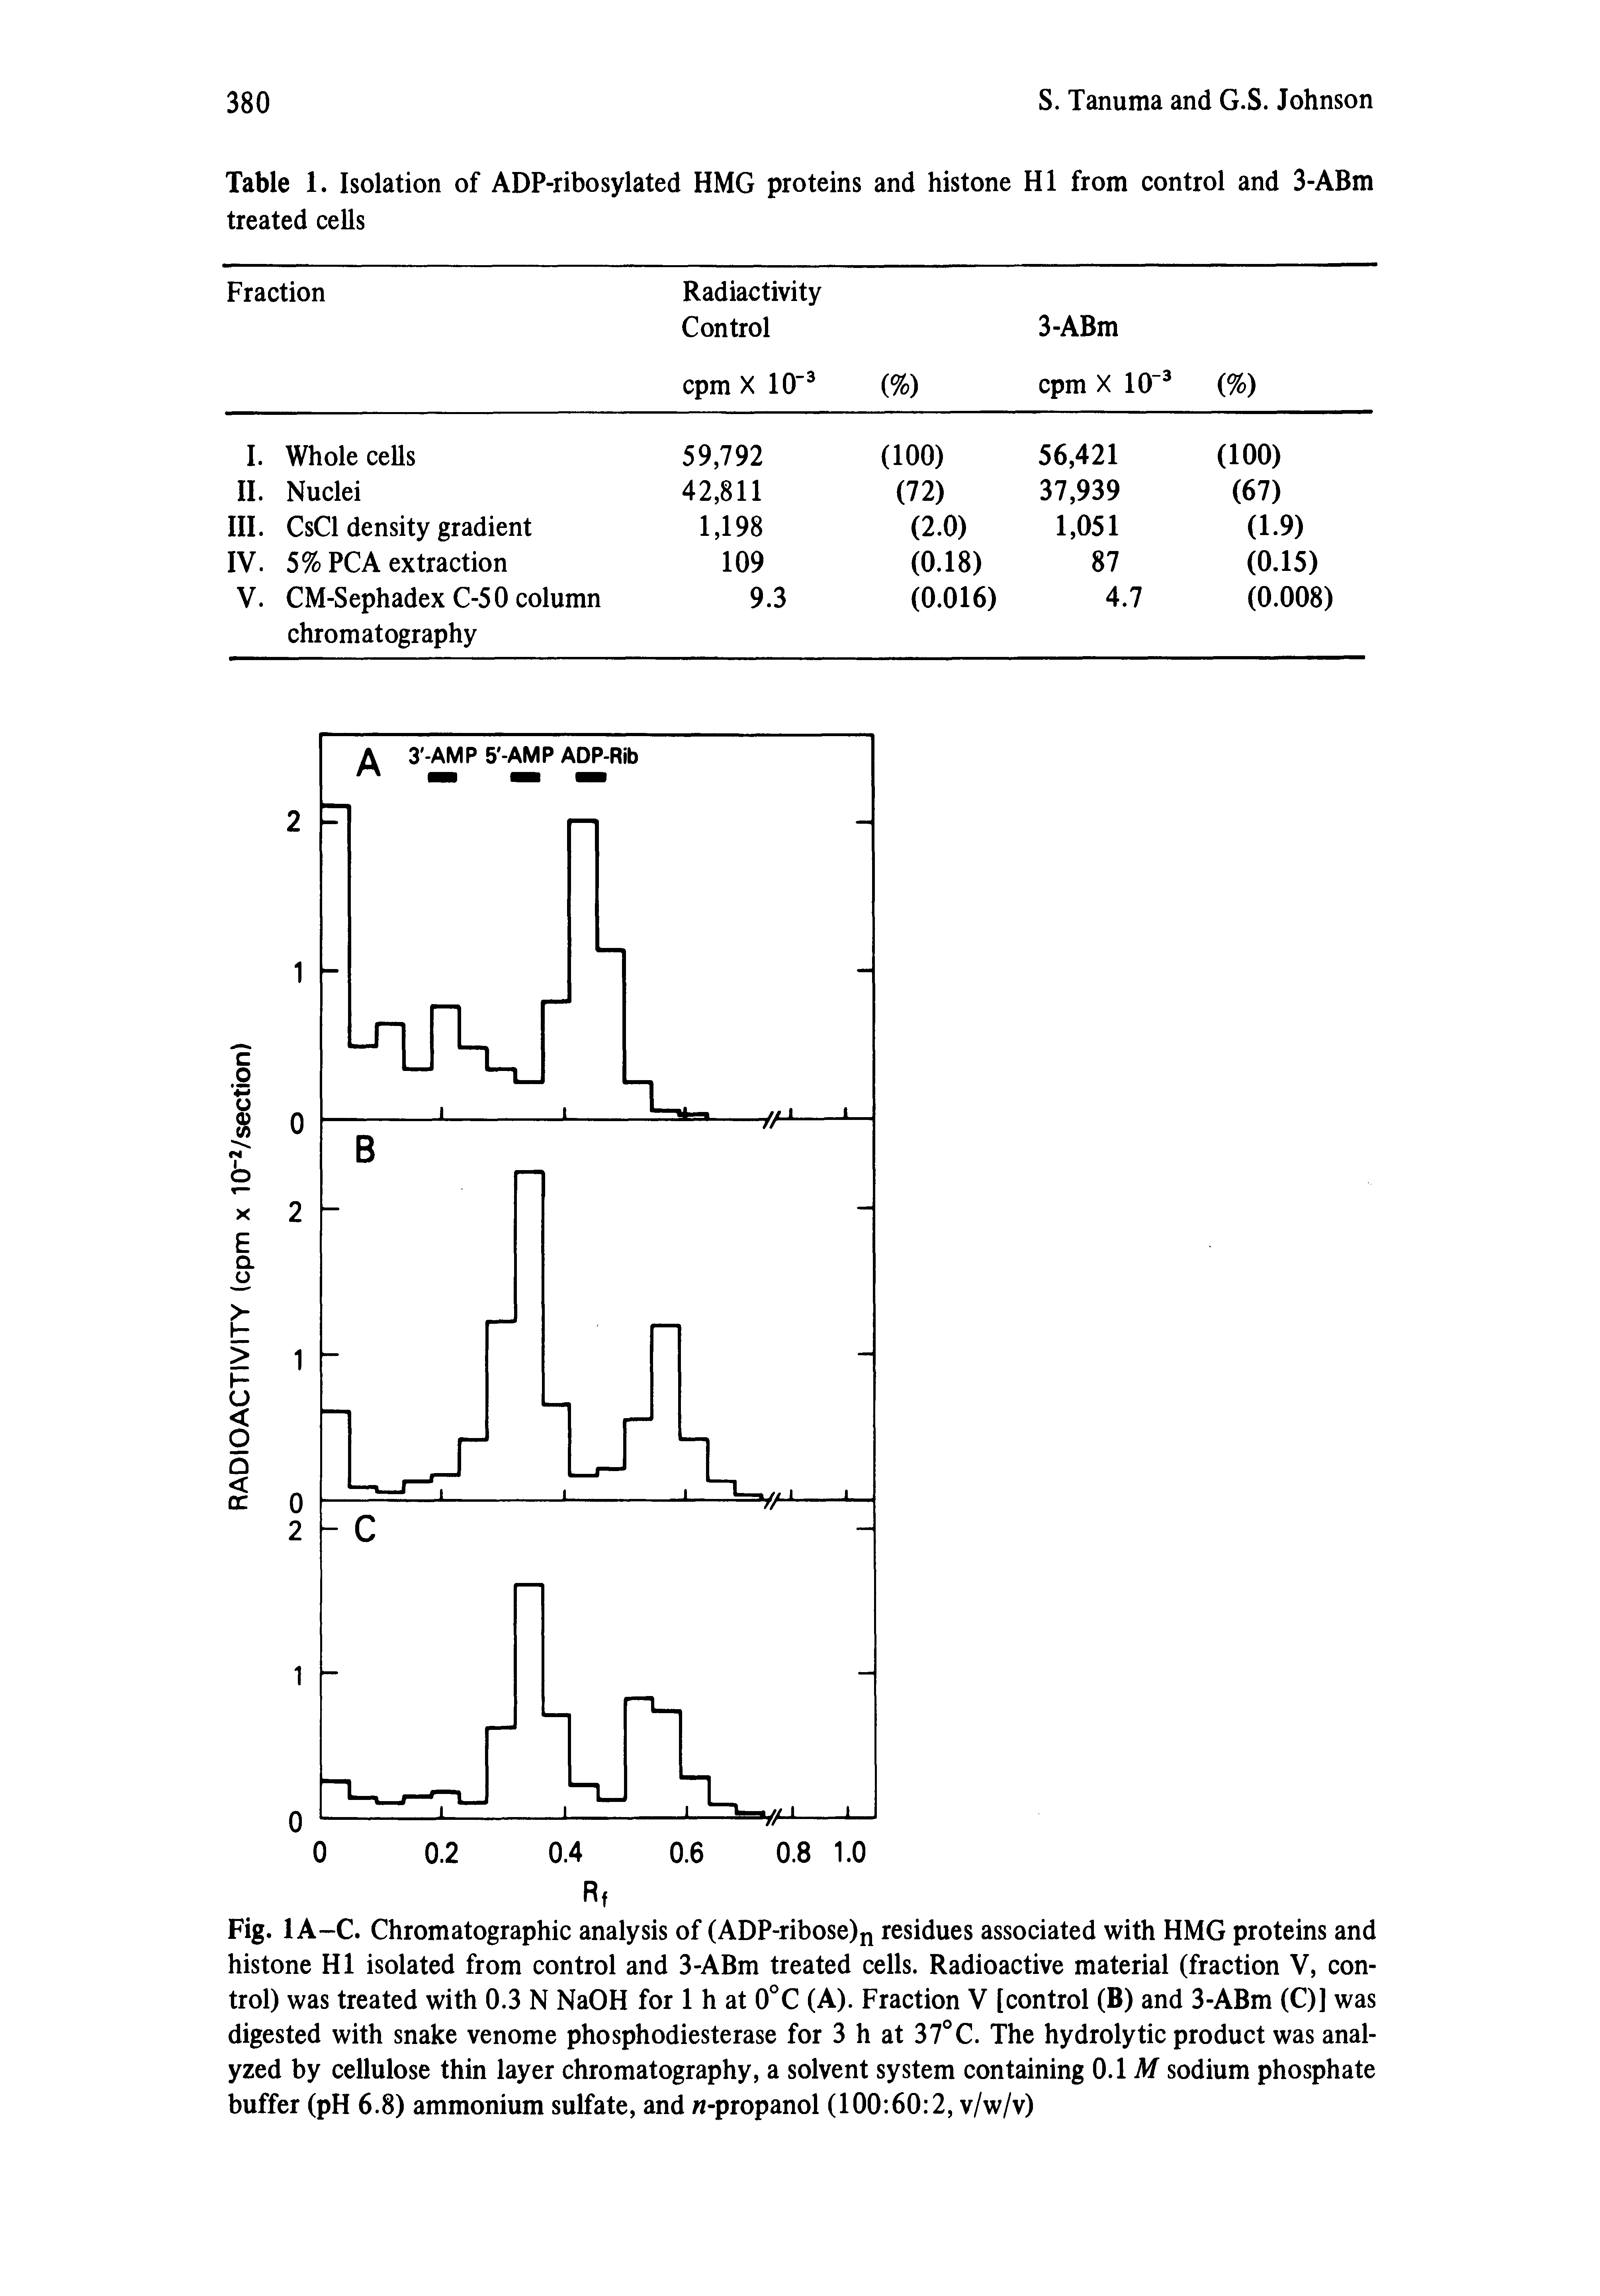 Fig. 1A-C. Chromatographic analysis of (ADP-ribose)n residues associated with HMG proteins and histone HI isolated from control and 3-ABm treated cells. Radioactive material (fraction V, control) was treated with 0.3 N NaOH for 1 h at 0°C (A). Fraction V [control (B) and 3-ABm (C)] was digested with snake venome phosphodiesterase for 3 h at 37°C. The hydrolytic product was analyzed by cellulose thin layer chromatography, a solvent system containing 0.1 A/ sodium phosphate buffer (pH 6.8) ammonium sulfate, and -propanol (100 60 2, v/w/v)...